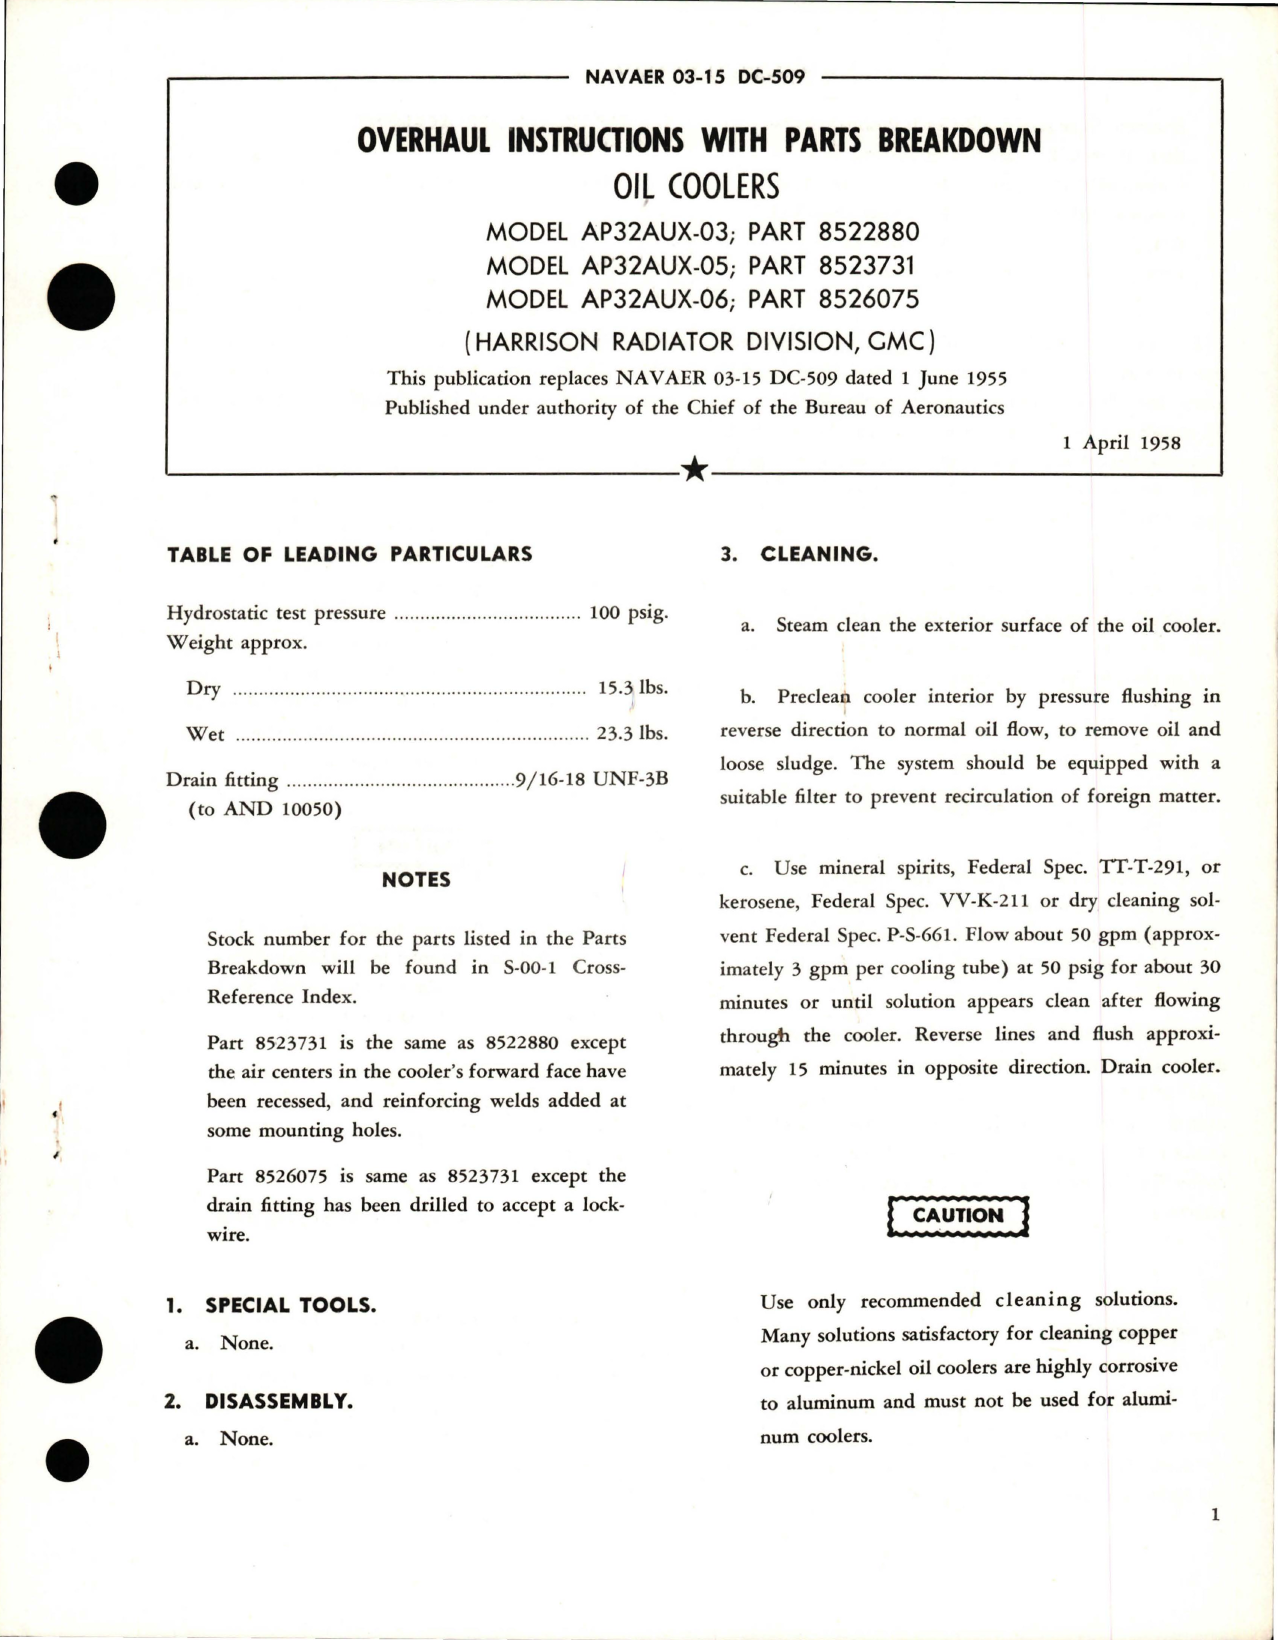 Sample page 1 from AirCorps Library document: Overhaul Instructions with Parts Breakdown for Oil Coolers